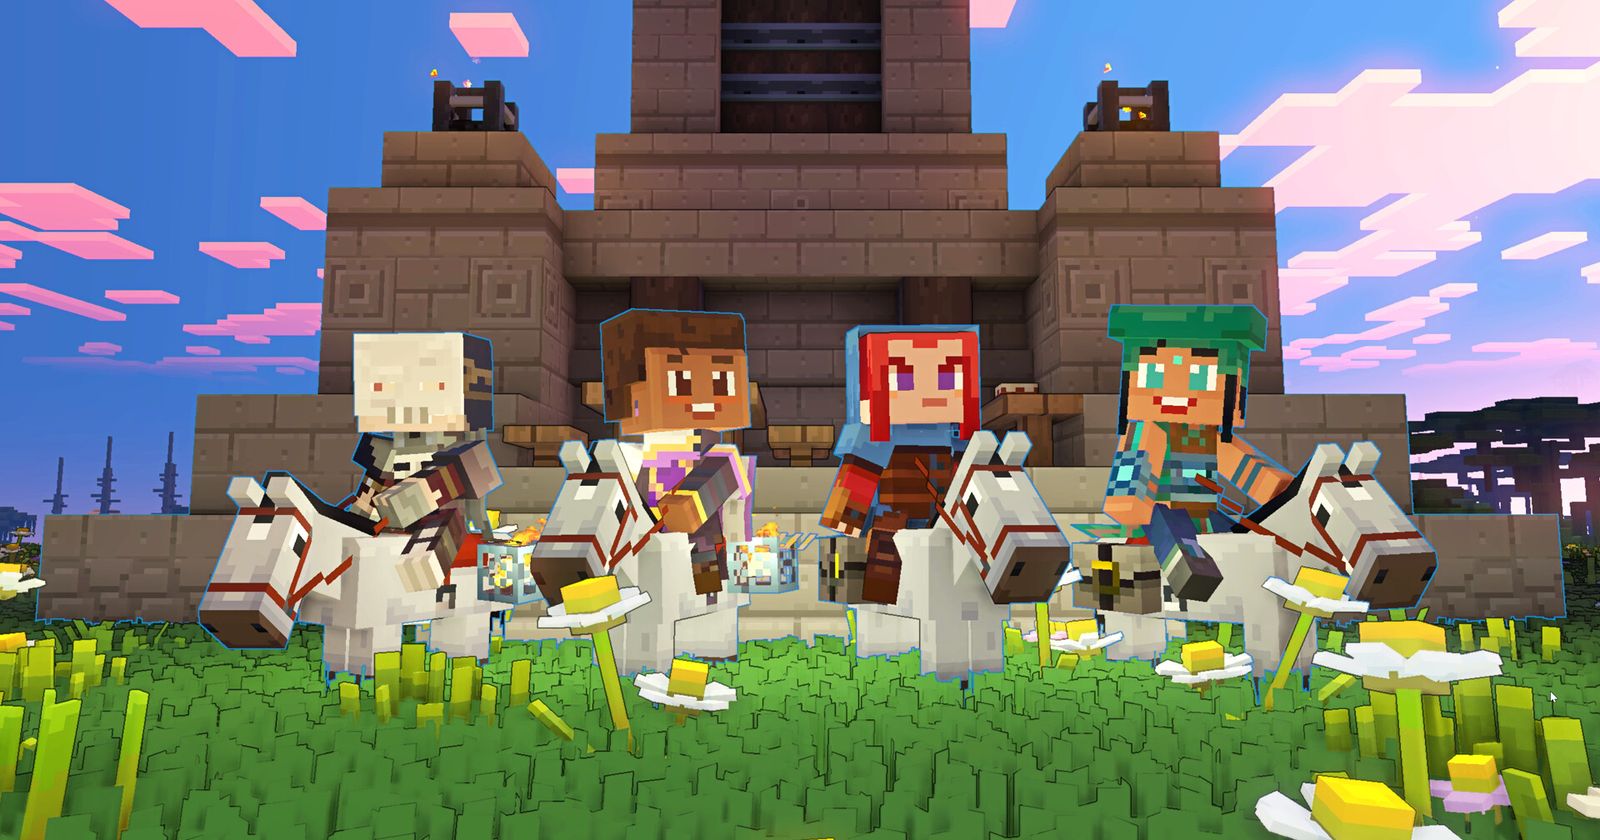 Minecraft LFG: Story Mode - Connect with Other Adventurers on Z League App